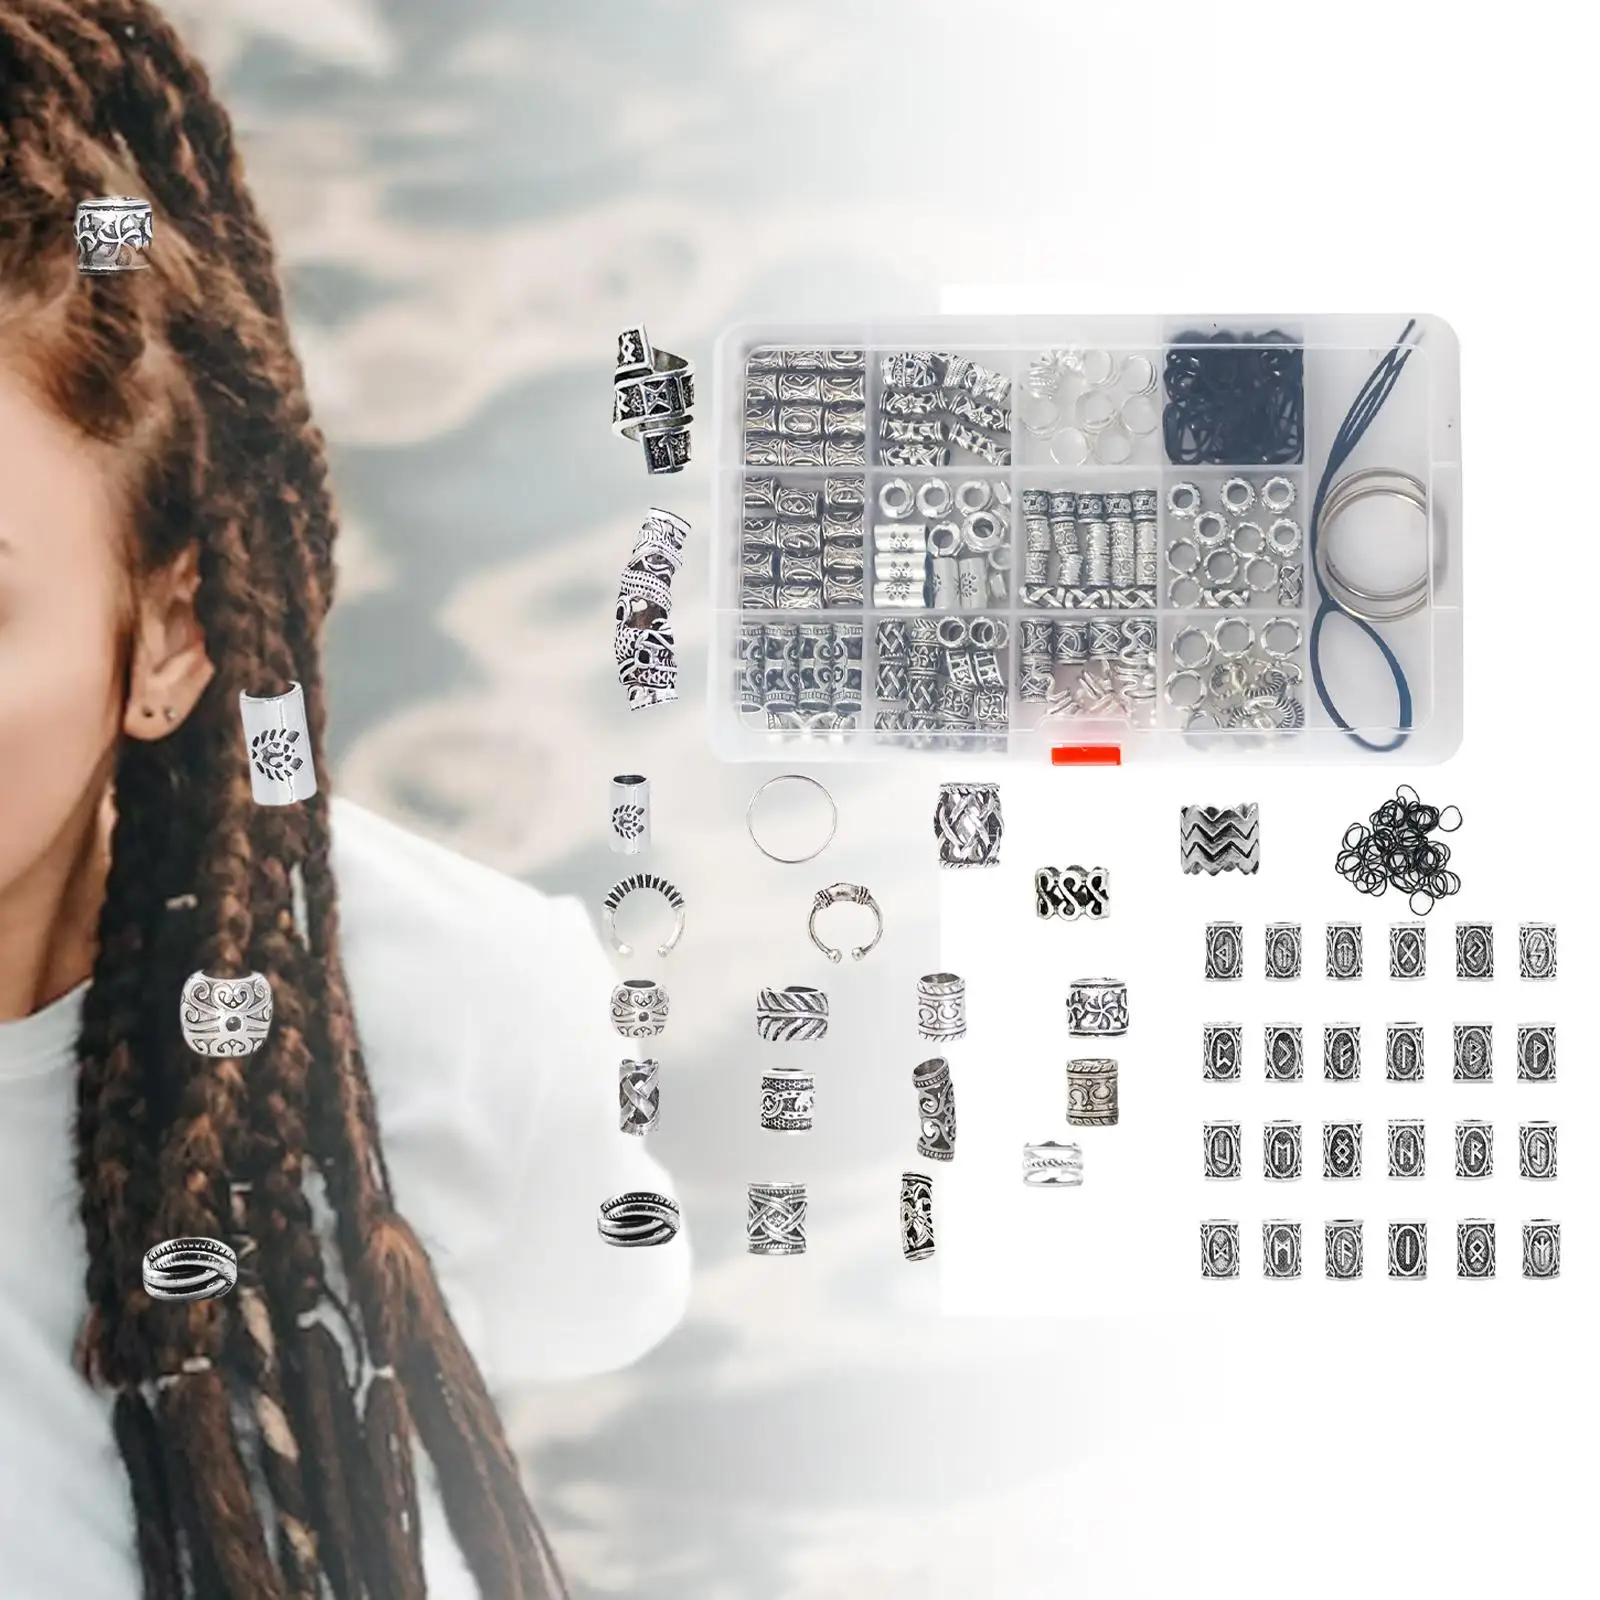 180 Pieces Mixed Dreadlocks Beads Tube Clips Pins Metal Cuffs Rings Accessories Decoration Hair Braiding Vintage Silver